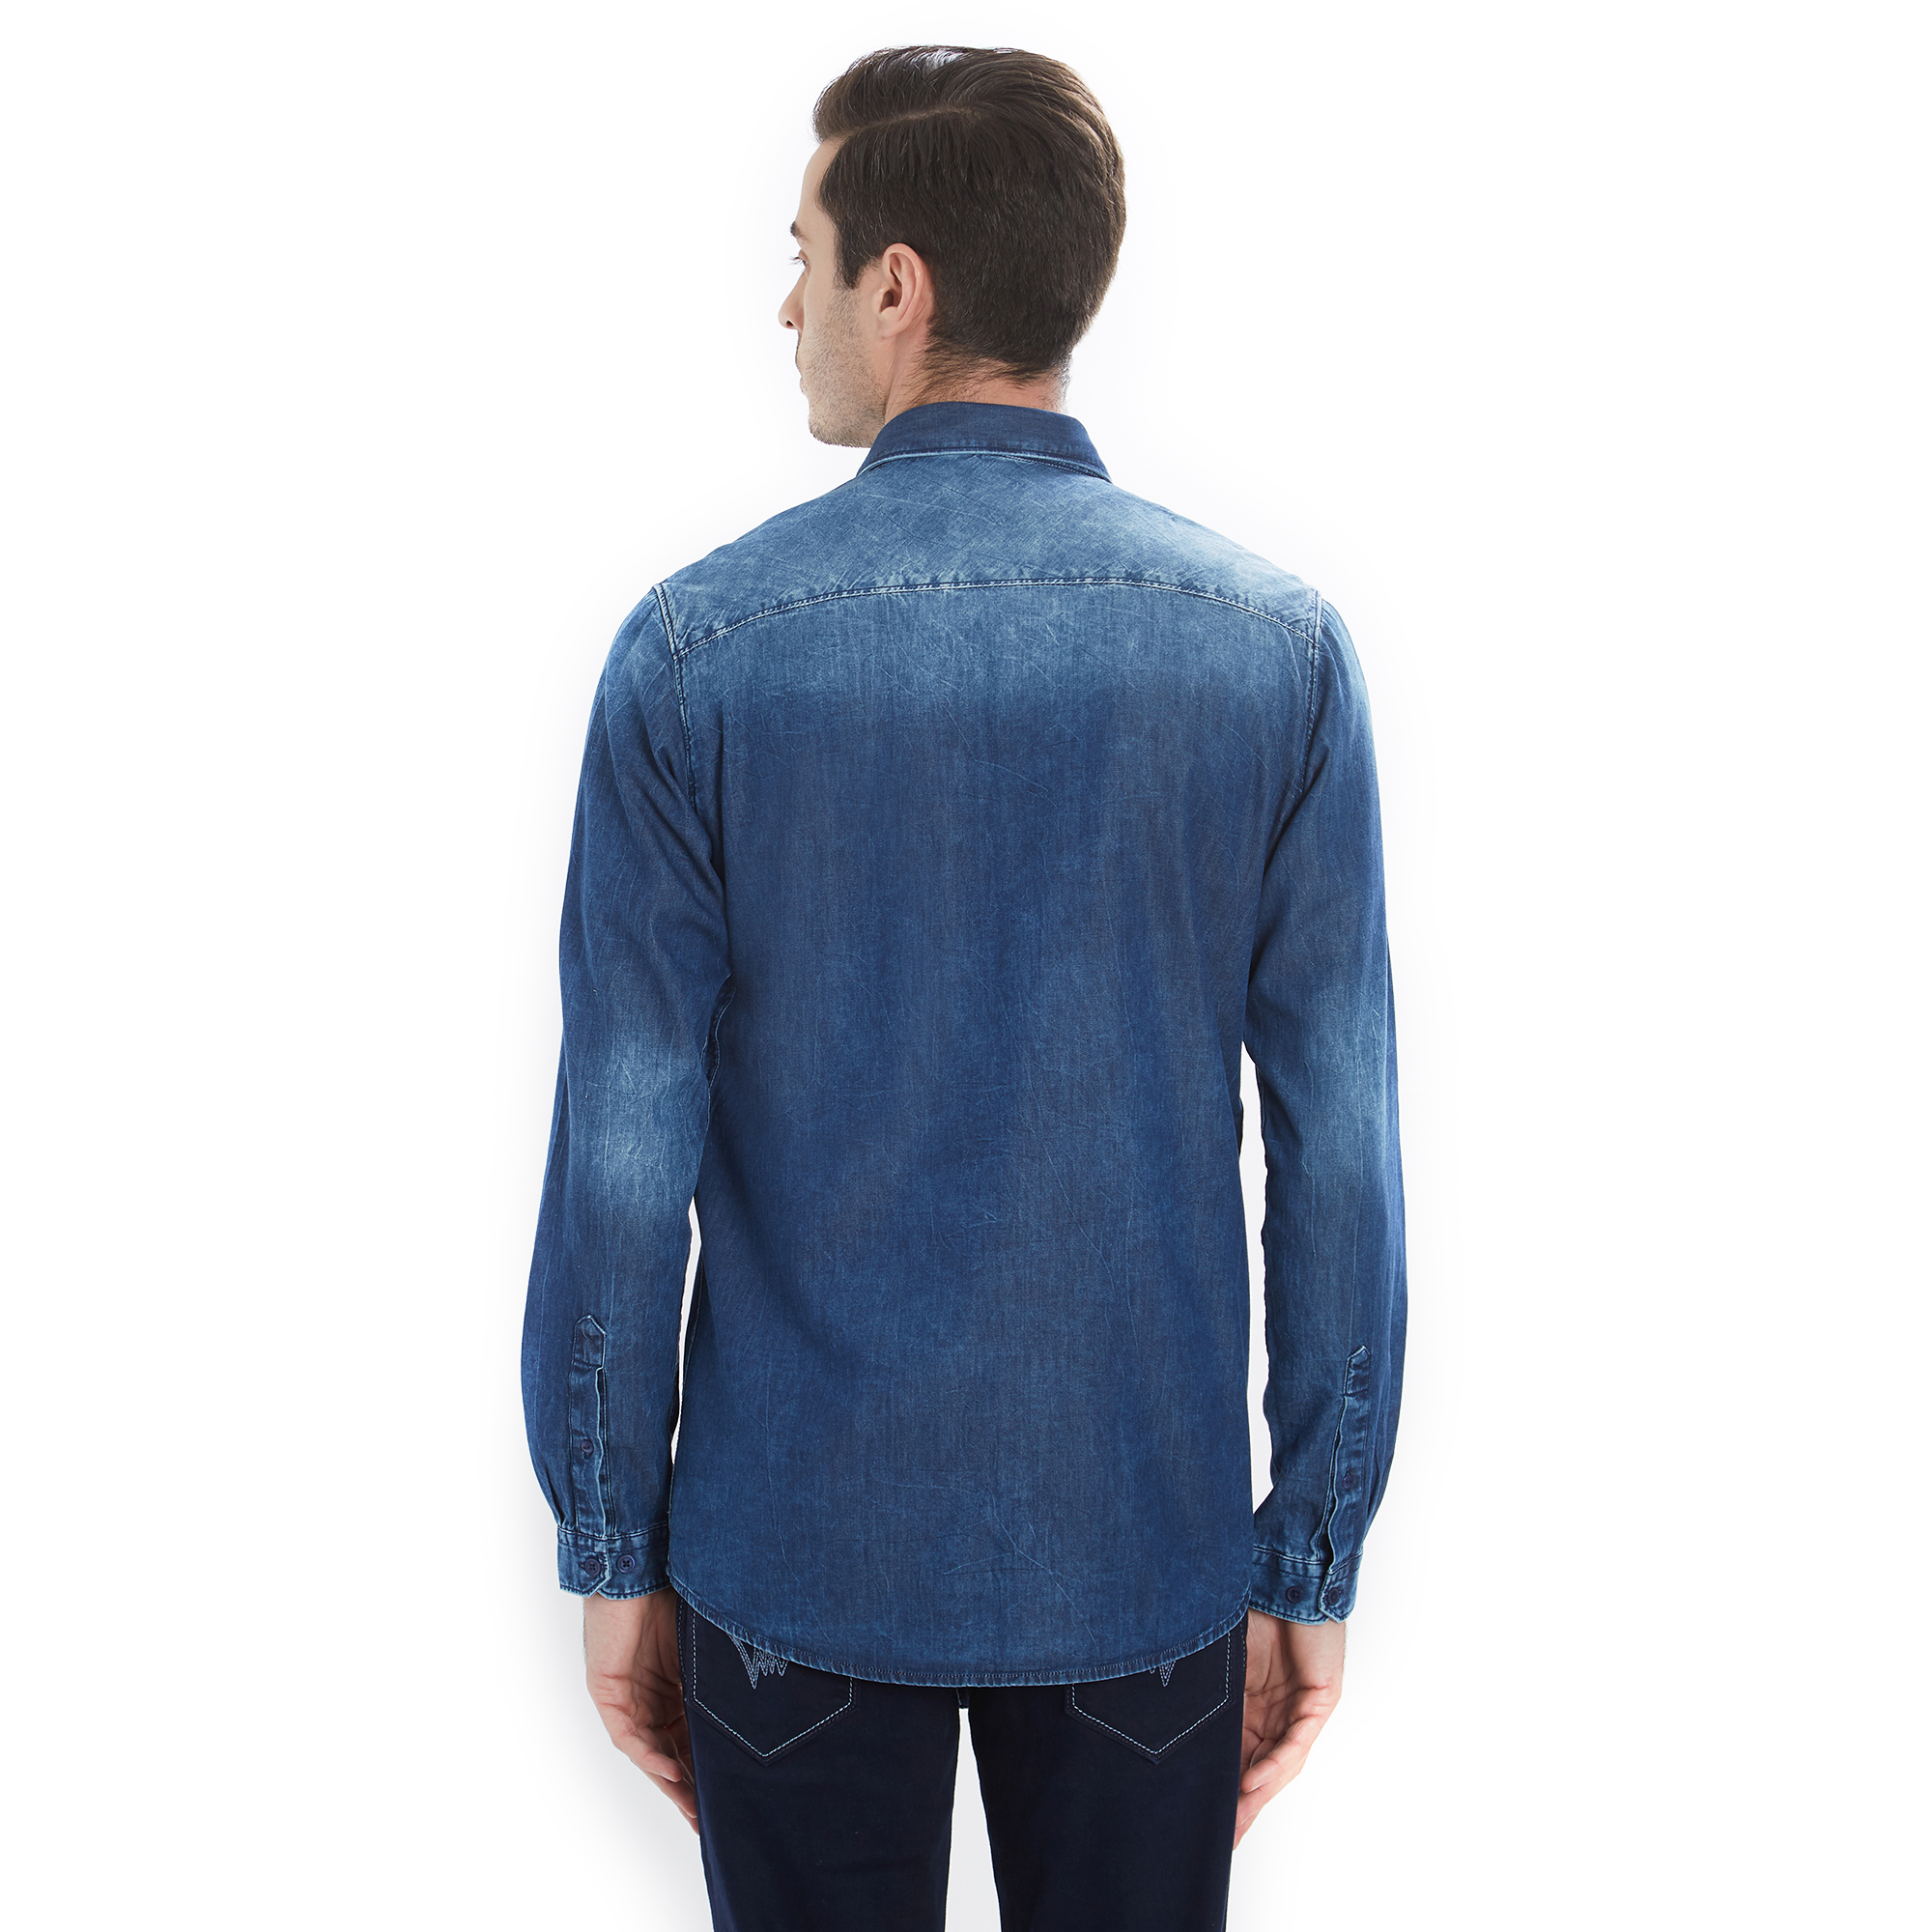 Buy Lawman Pg3 Men's Blue Casual Shirt Online @ ₹1899 from ShopClues